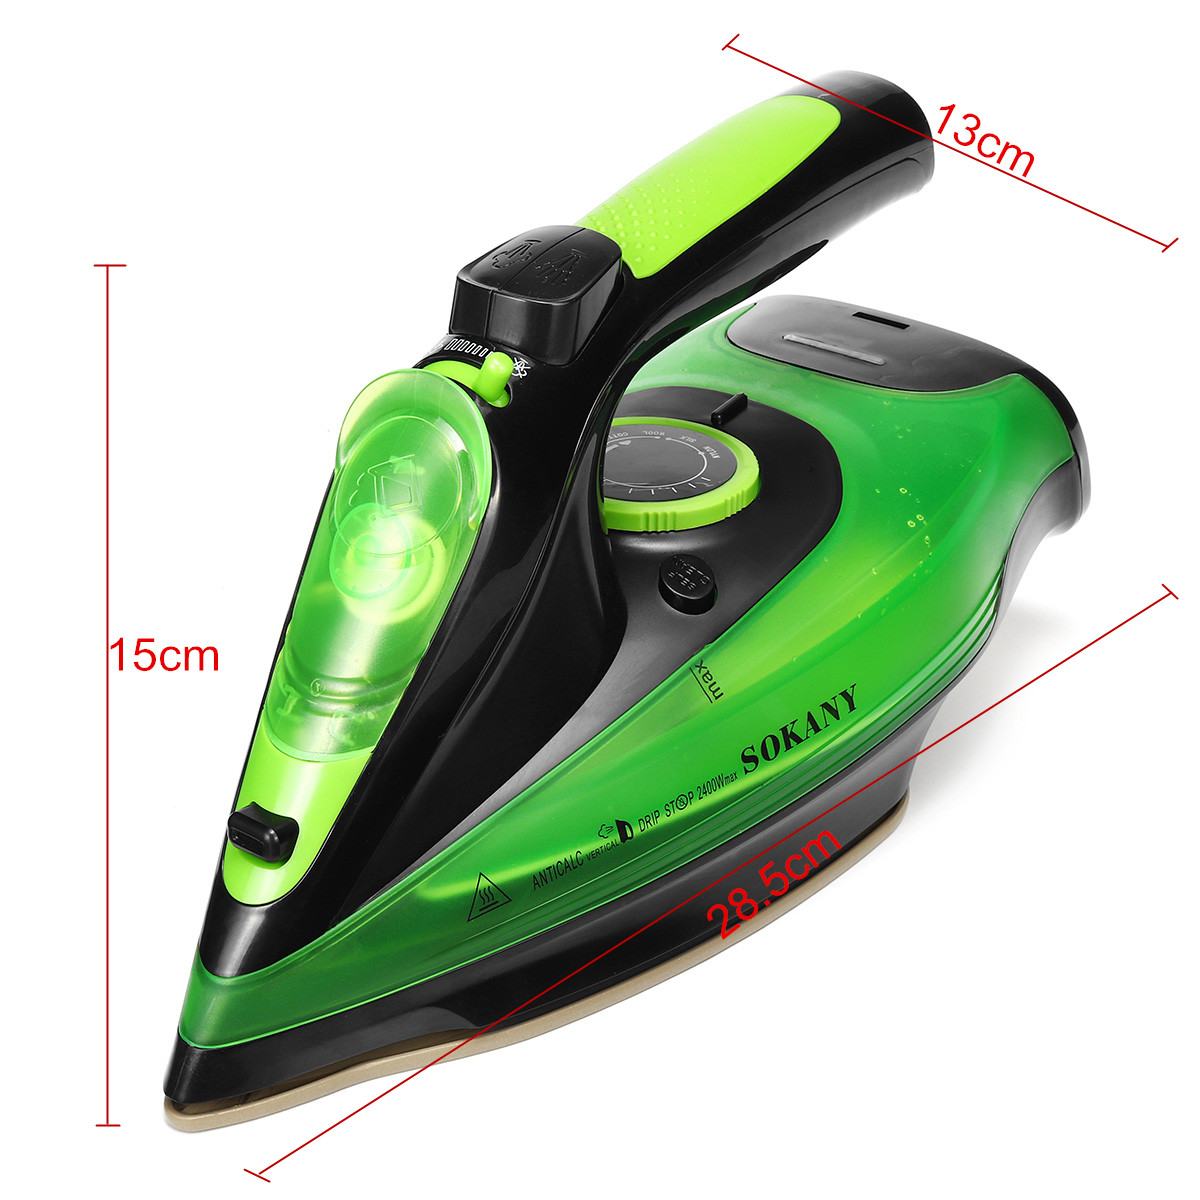 2400W Cordless Electric Steam Iron 5 Speed Adjust for garment Steam Generator Clothes Ironing Steamer Ceramic Soleplate Portable